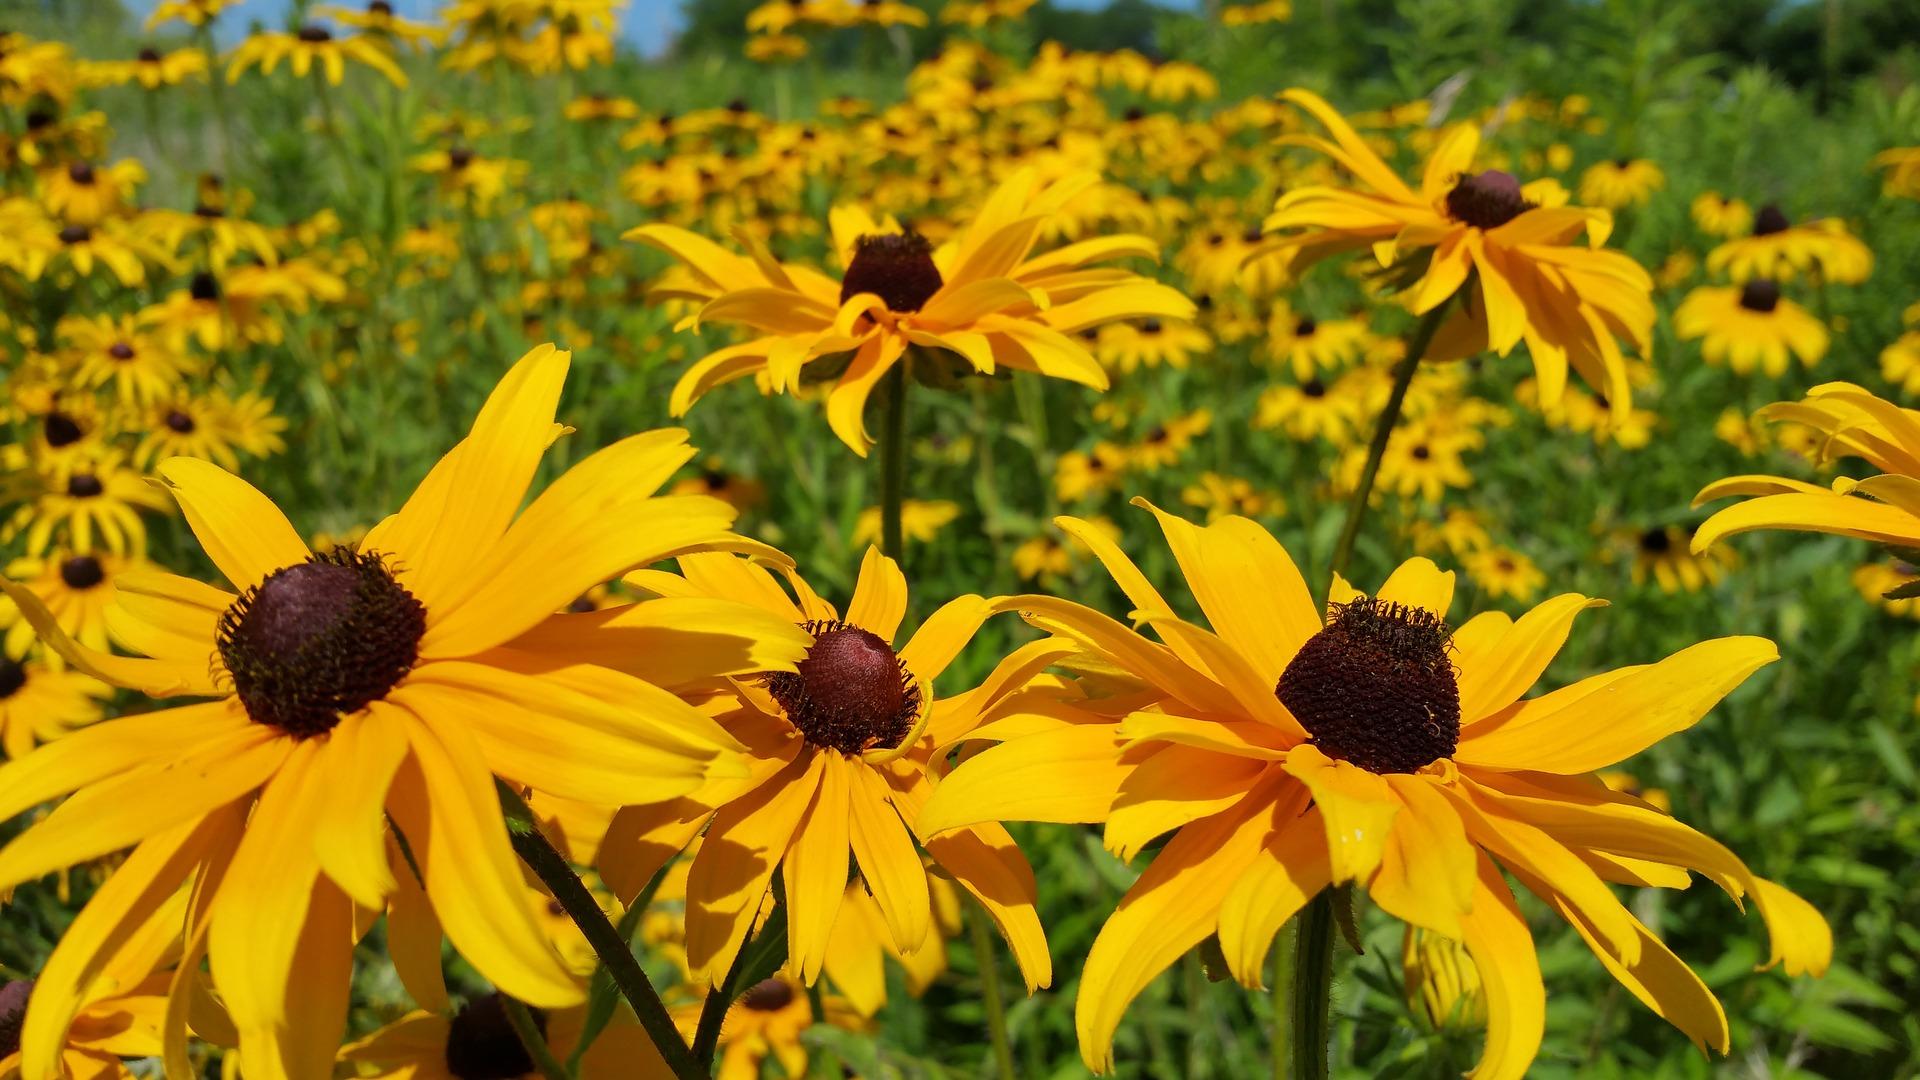 Black-eyed Susans are among the many types of native plants available for purchase. (brian60174 / Pixabay)